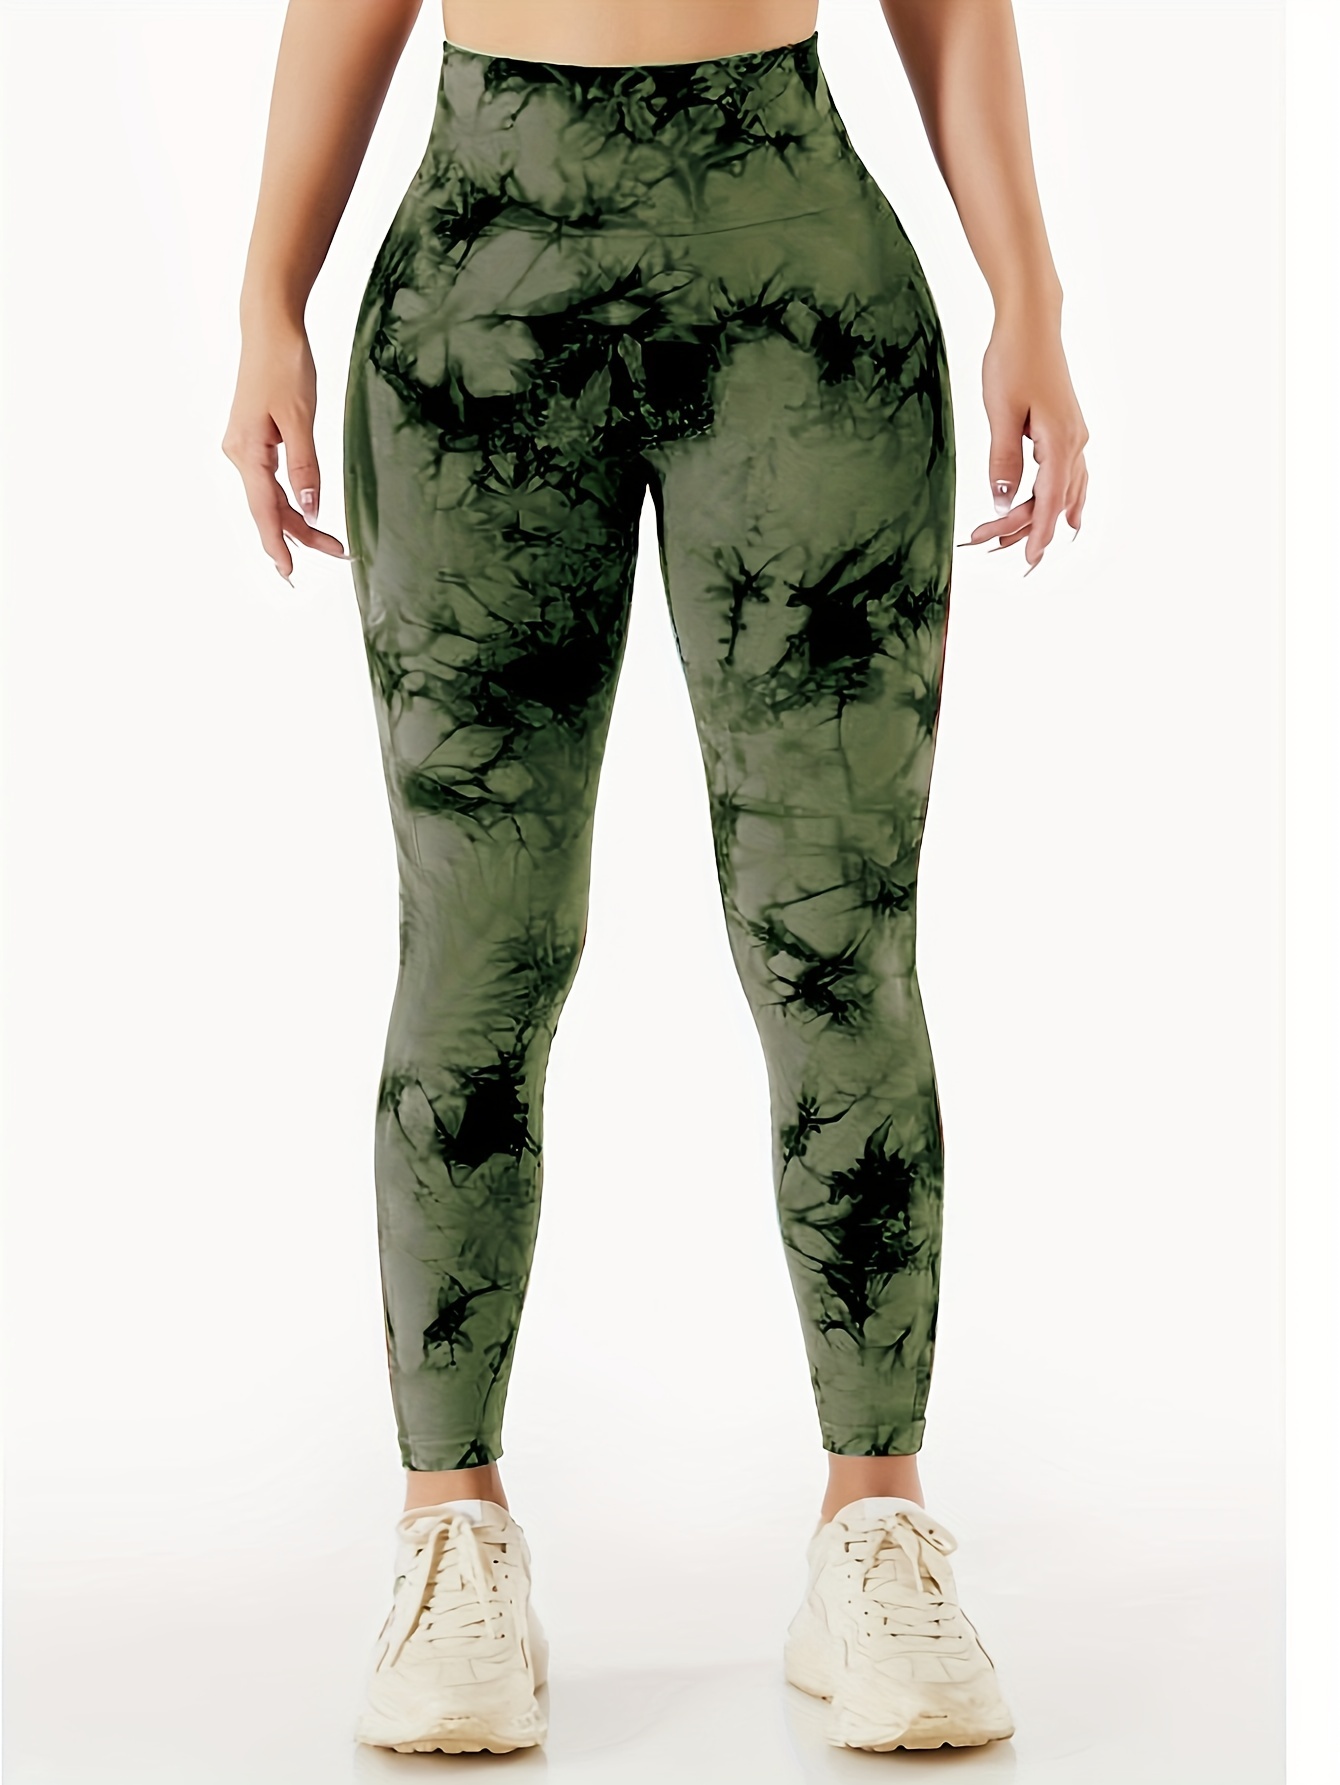 xinqinghao yoga pants women women seamless tie dye and tie float yoga  workout pants yoga pants with pockets army green xs 